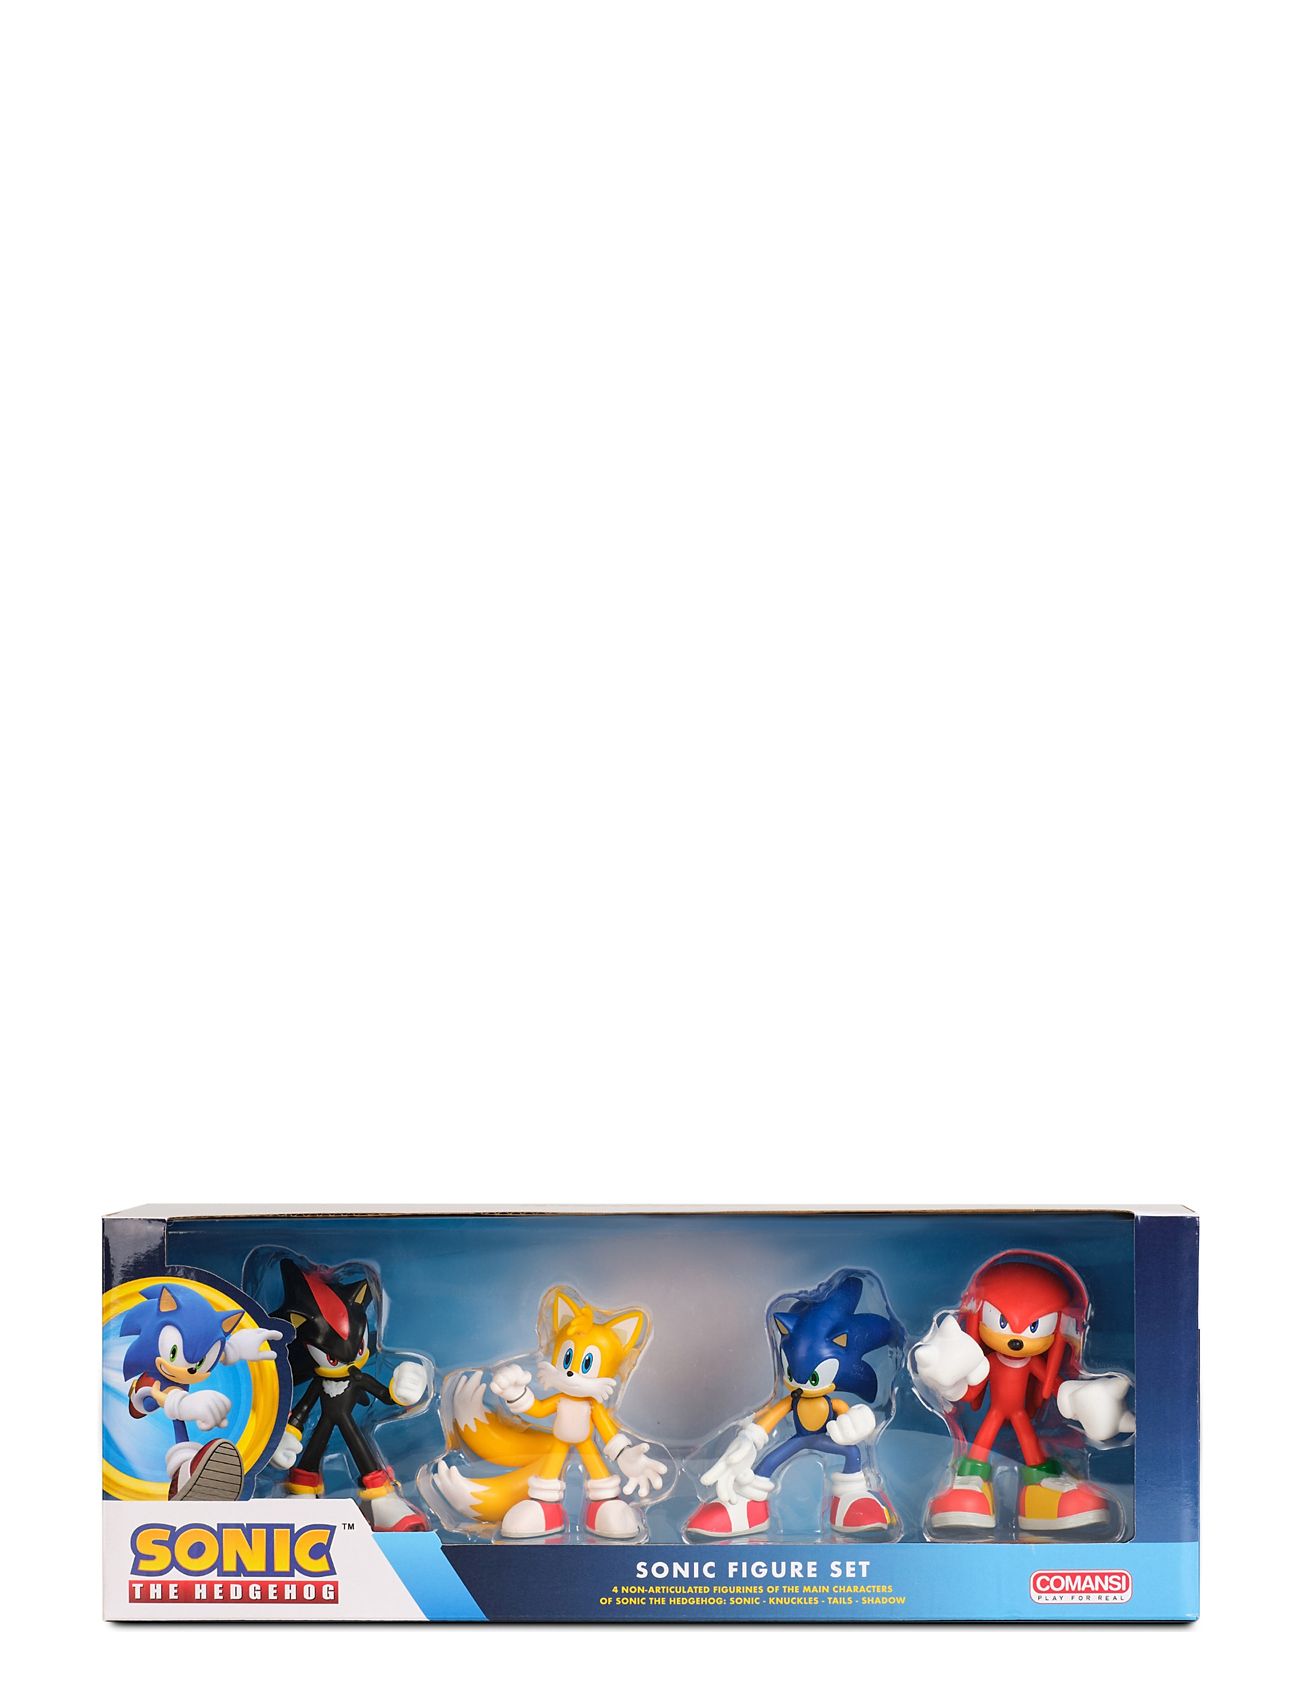 Sonic Gift Box Set 4 Figurines Toys Playsets & Action Figures Movies & Fairy Tale Characters Multi/patterned Comansi